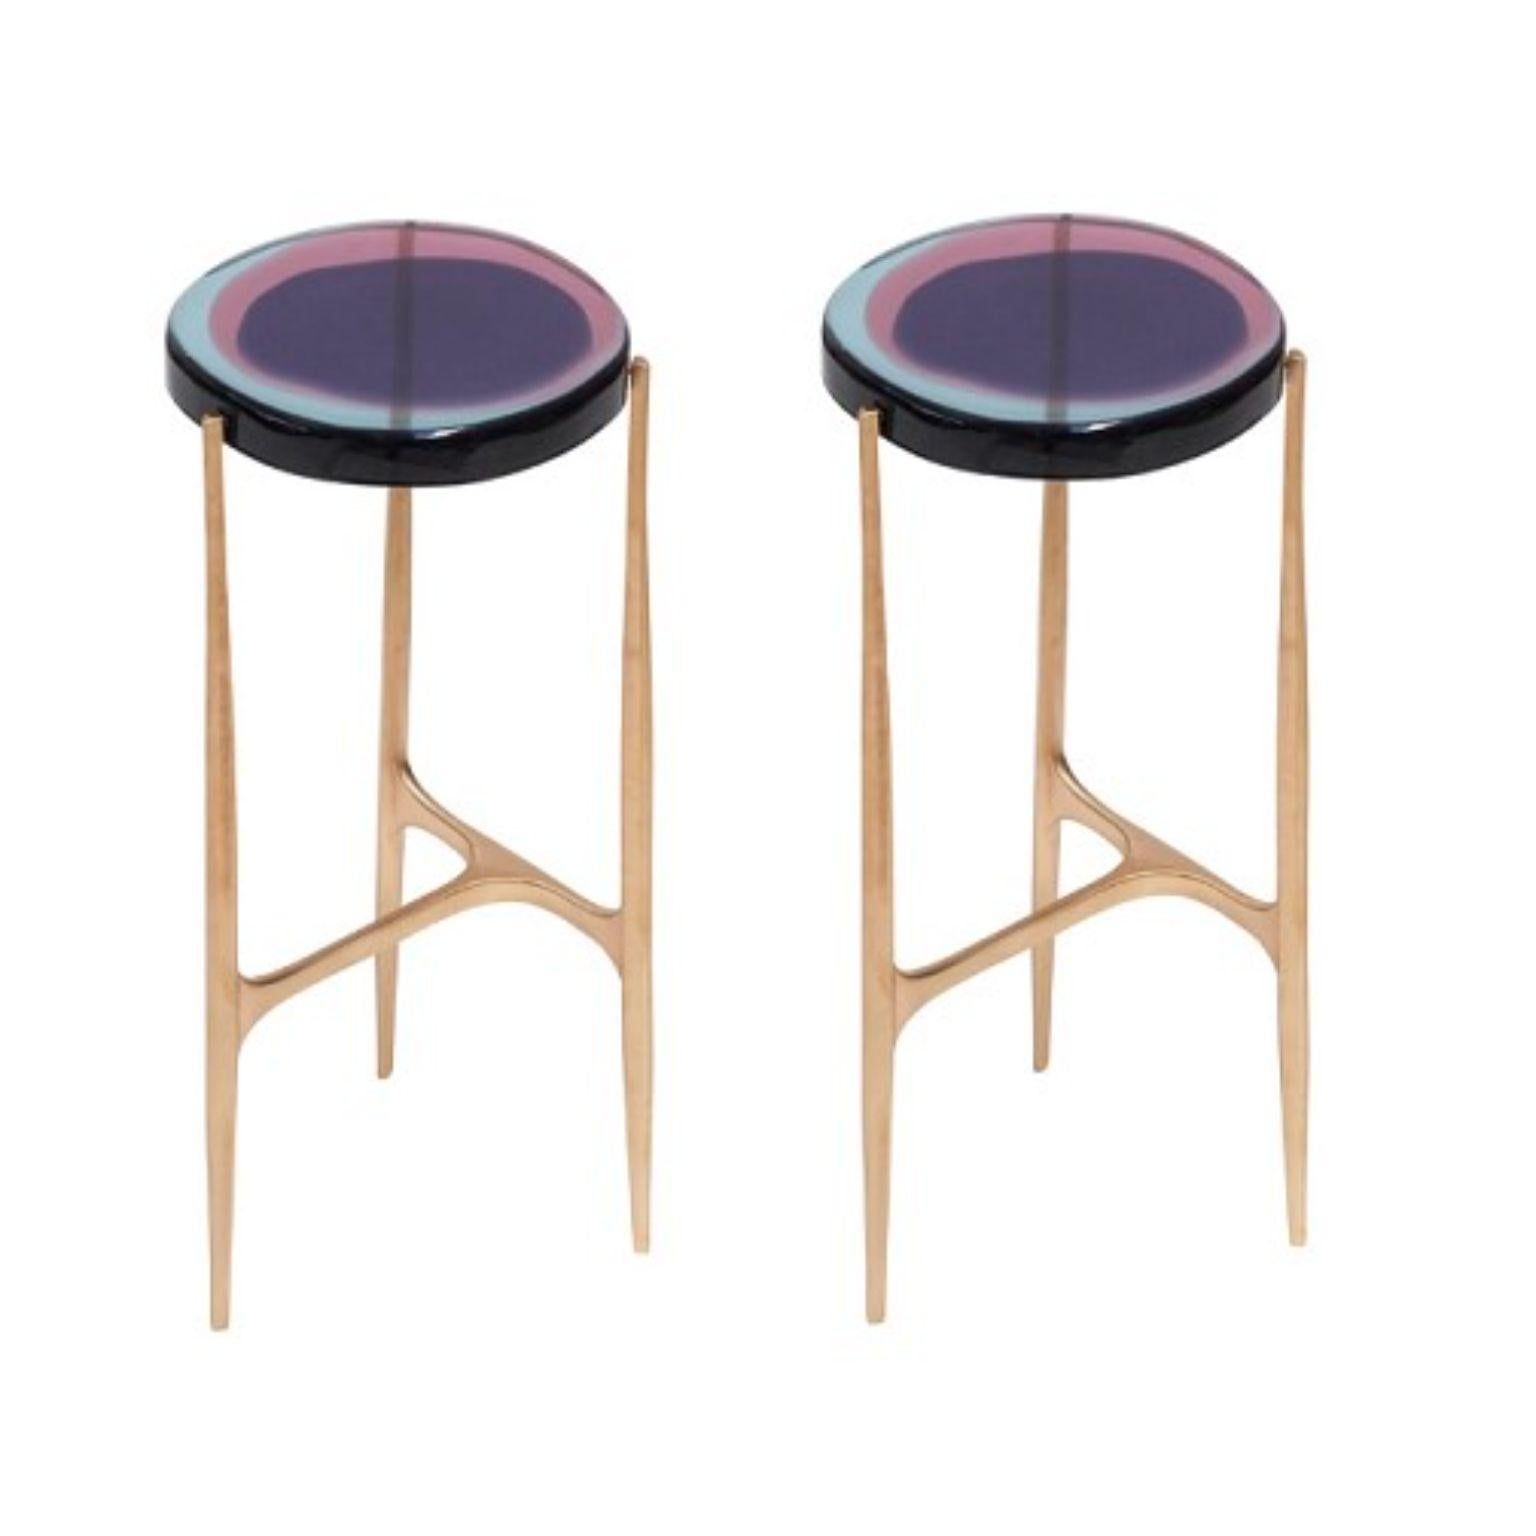 Set of 2 Agatha coffee tables by Draga & Aurel
Dimensions: W 24 x D 24 x H 56
Top Ø 34 cm
Materials: Resin and bronze

The Agatha coffee tables are featured by irregular circular tops of transparent and
colorful resin sit on a bronze frame with a